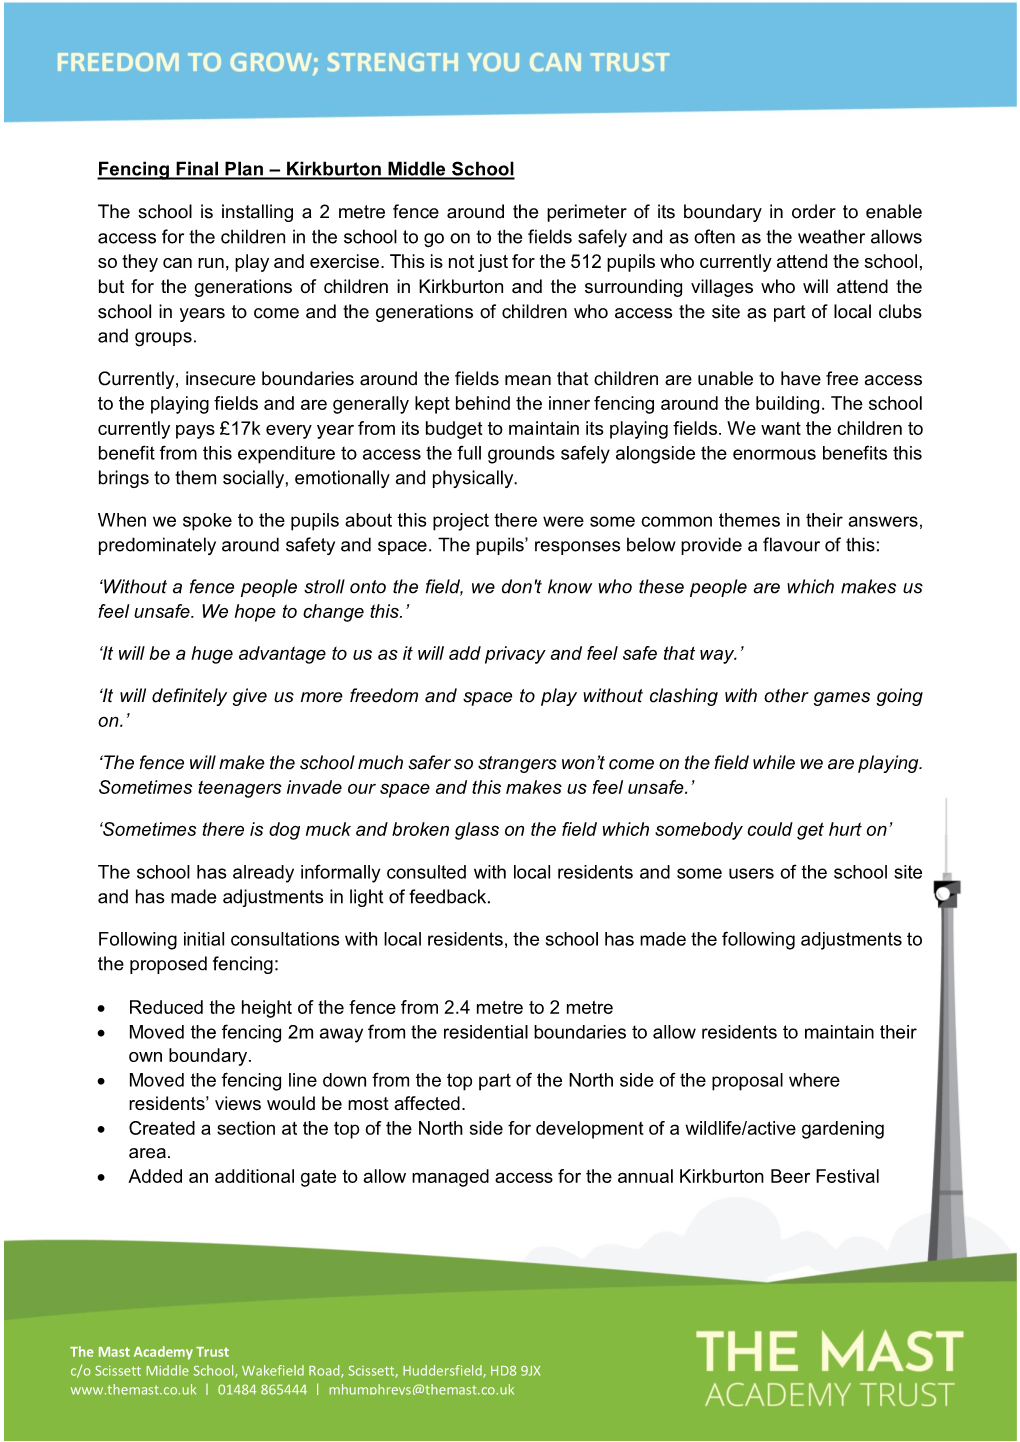 Fencing Final Plan – Kirkburton Middle School the School Is Installing a 2 Metre Fence Around the Perimeter of Its Boundary In